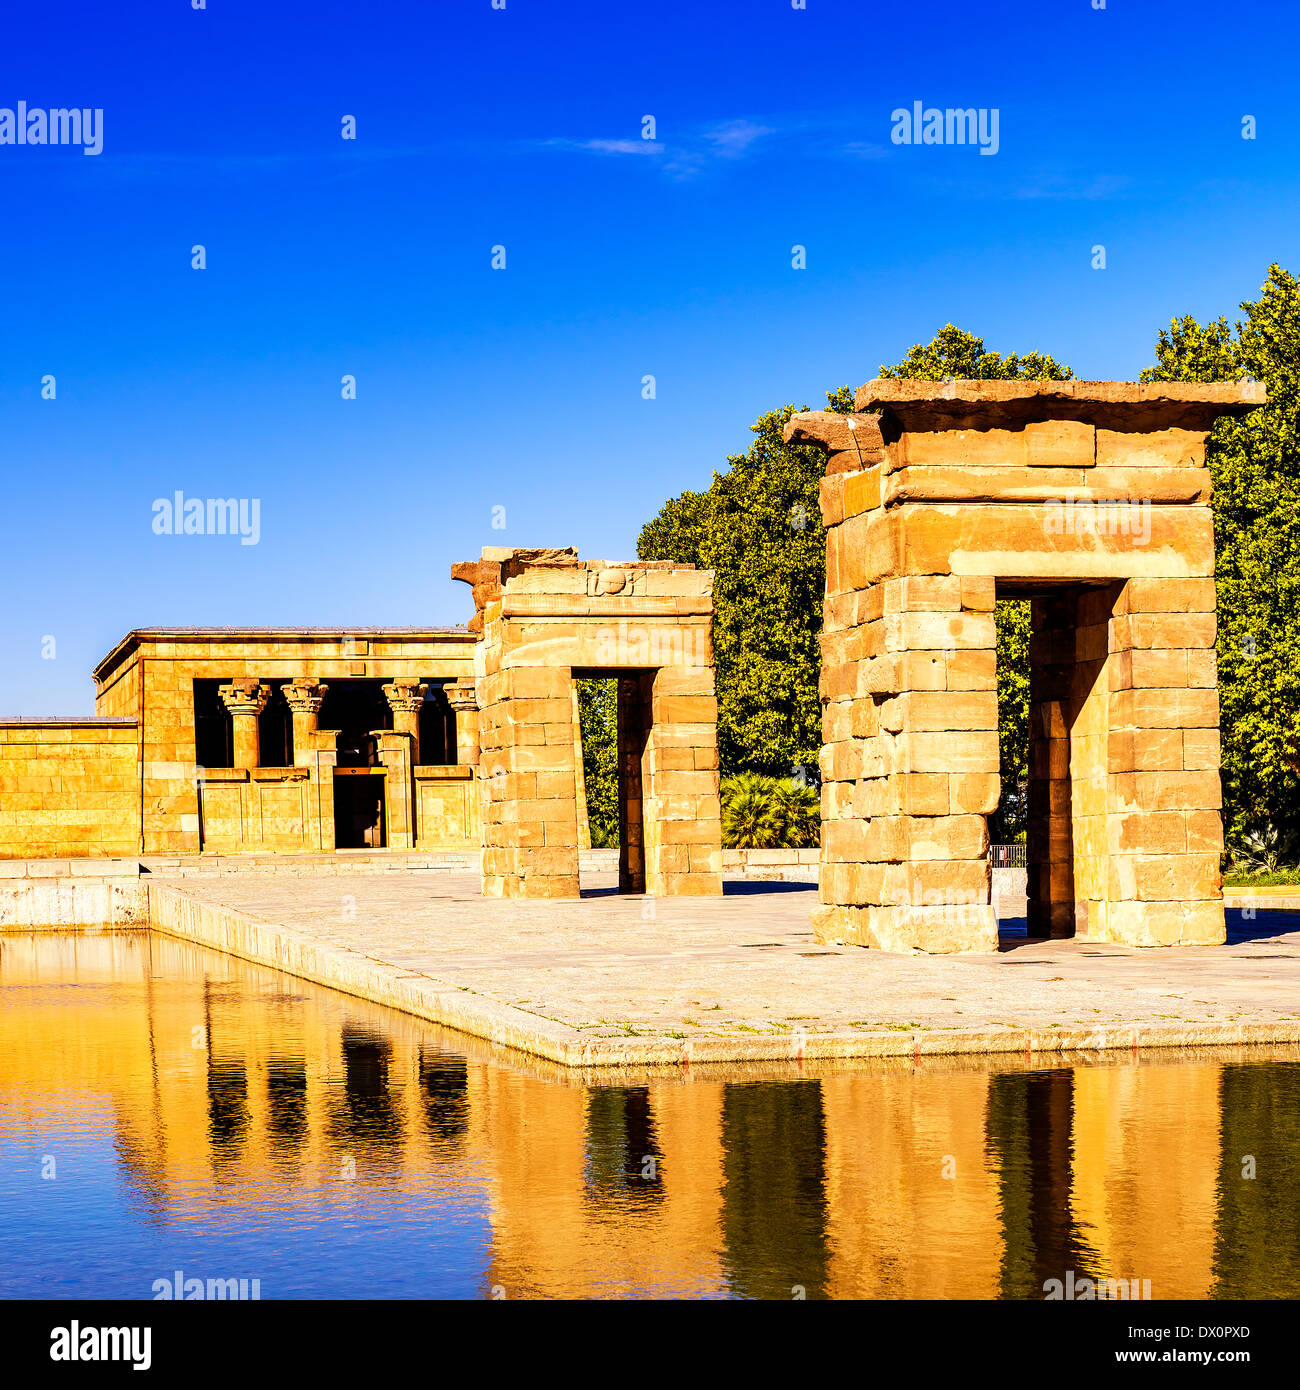 Temple of Debod Egyptian antic architecture Madrid, Spain Stock Photo